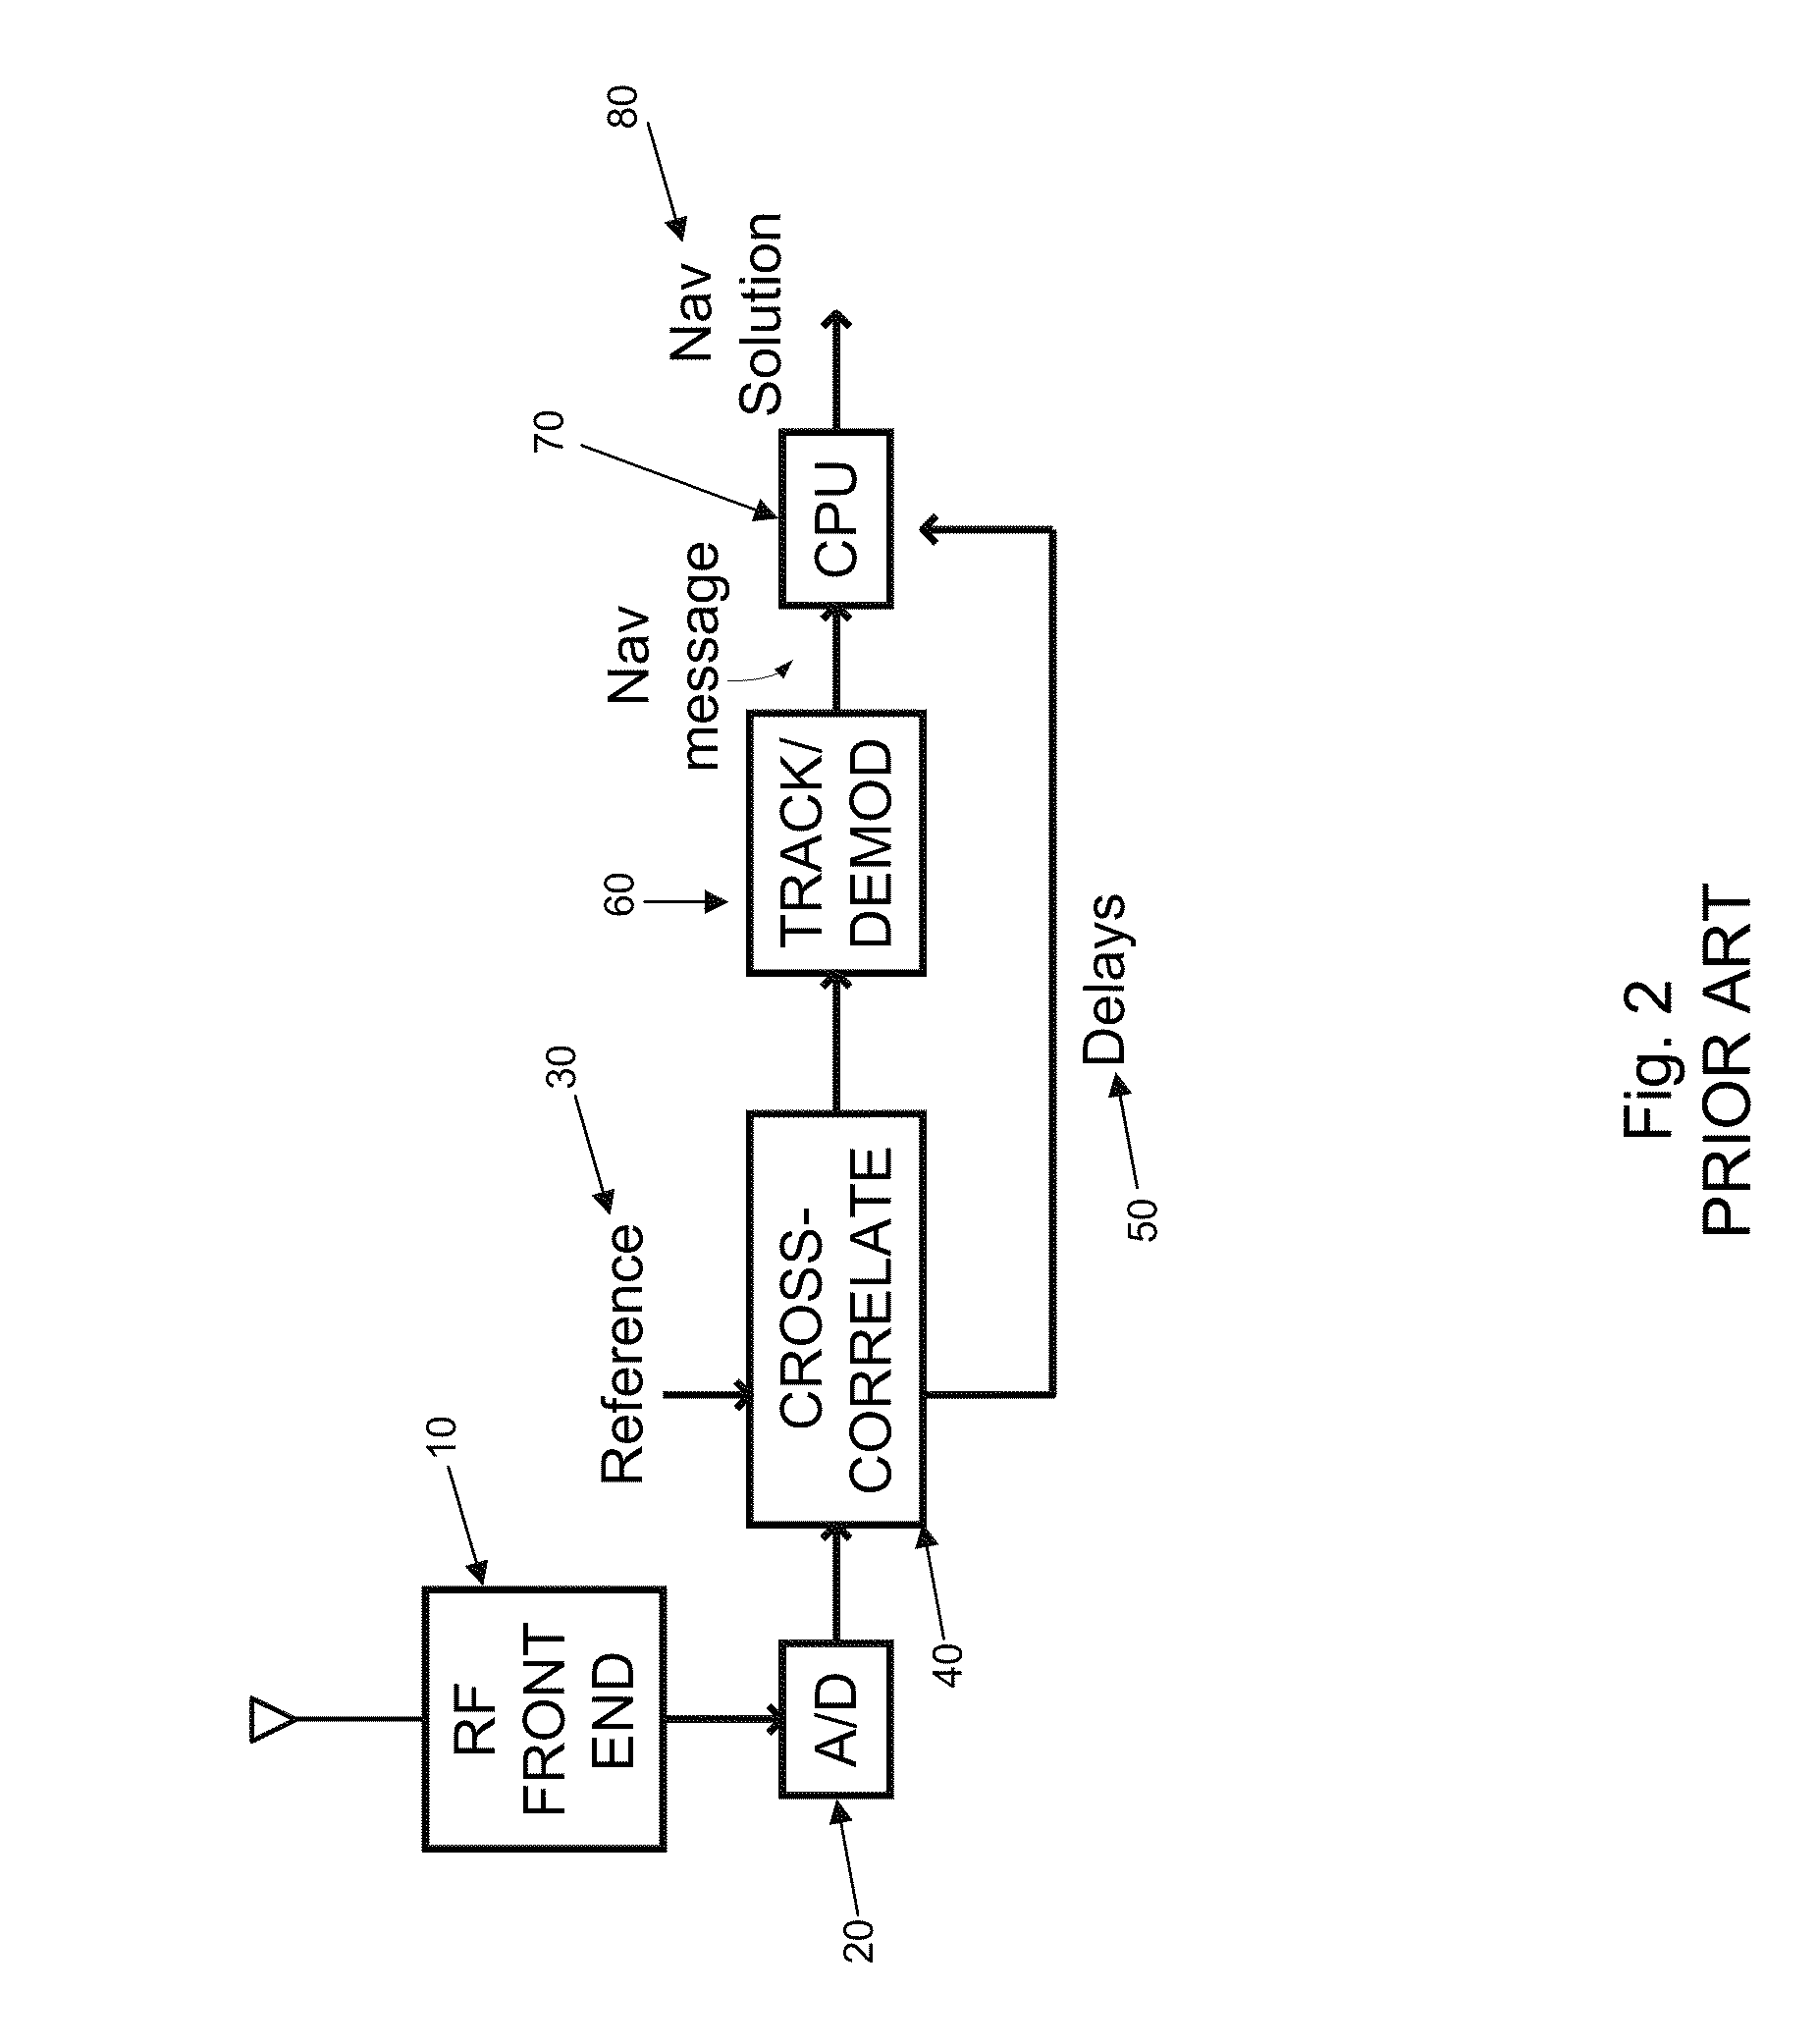 System and method for geo-locating a receiver with reduced power consumption